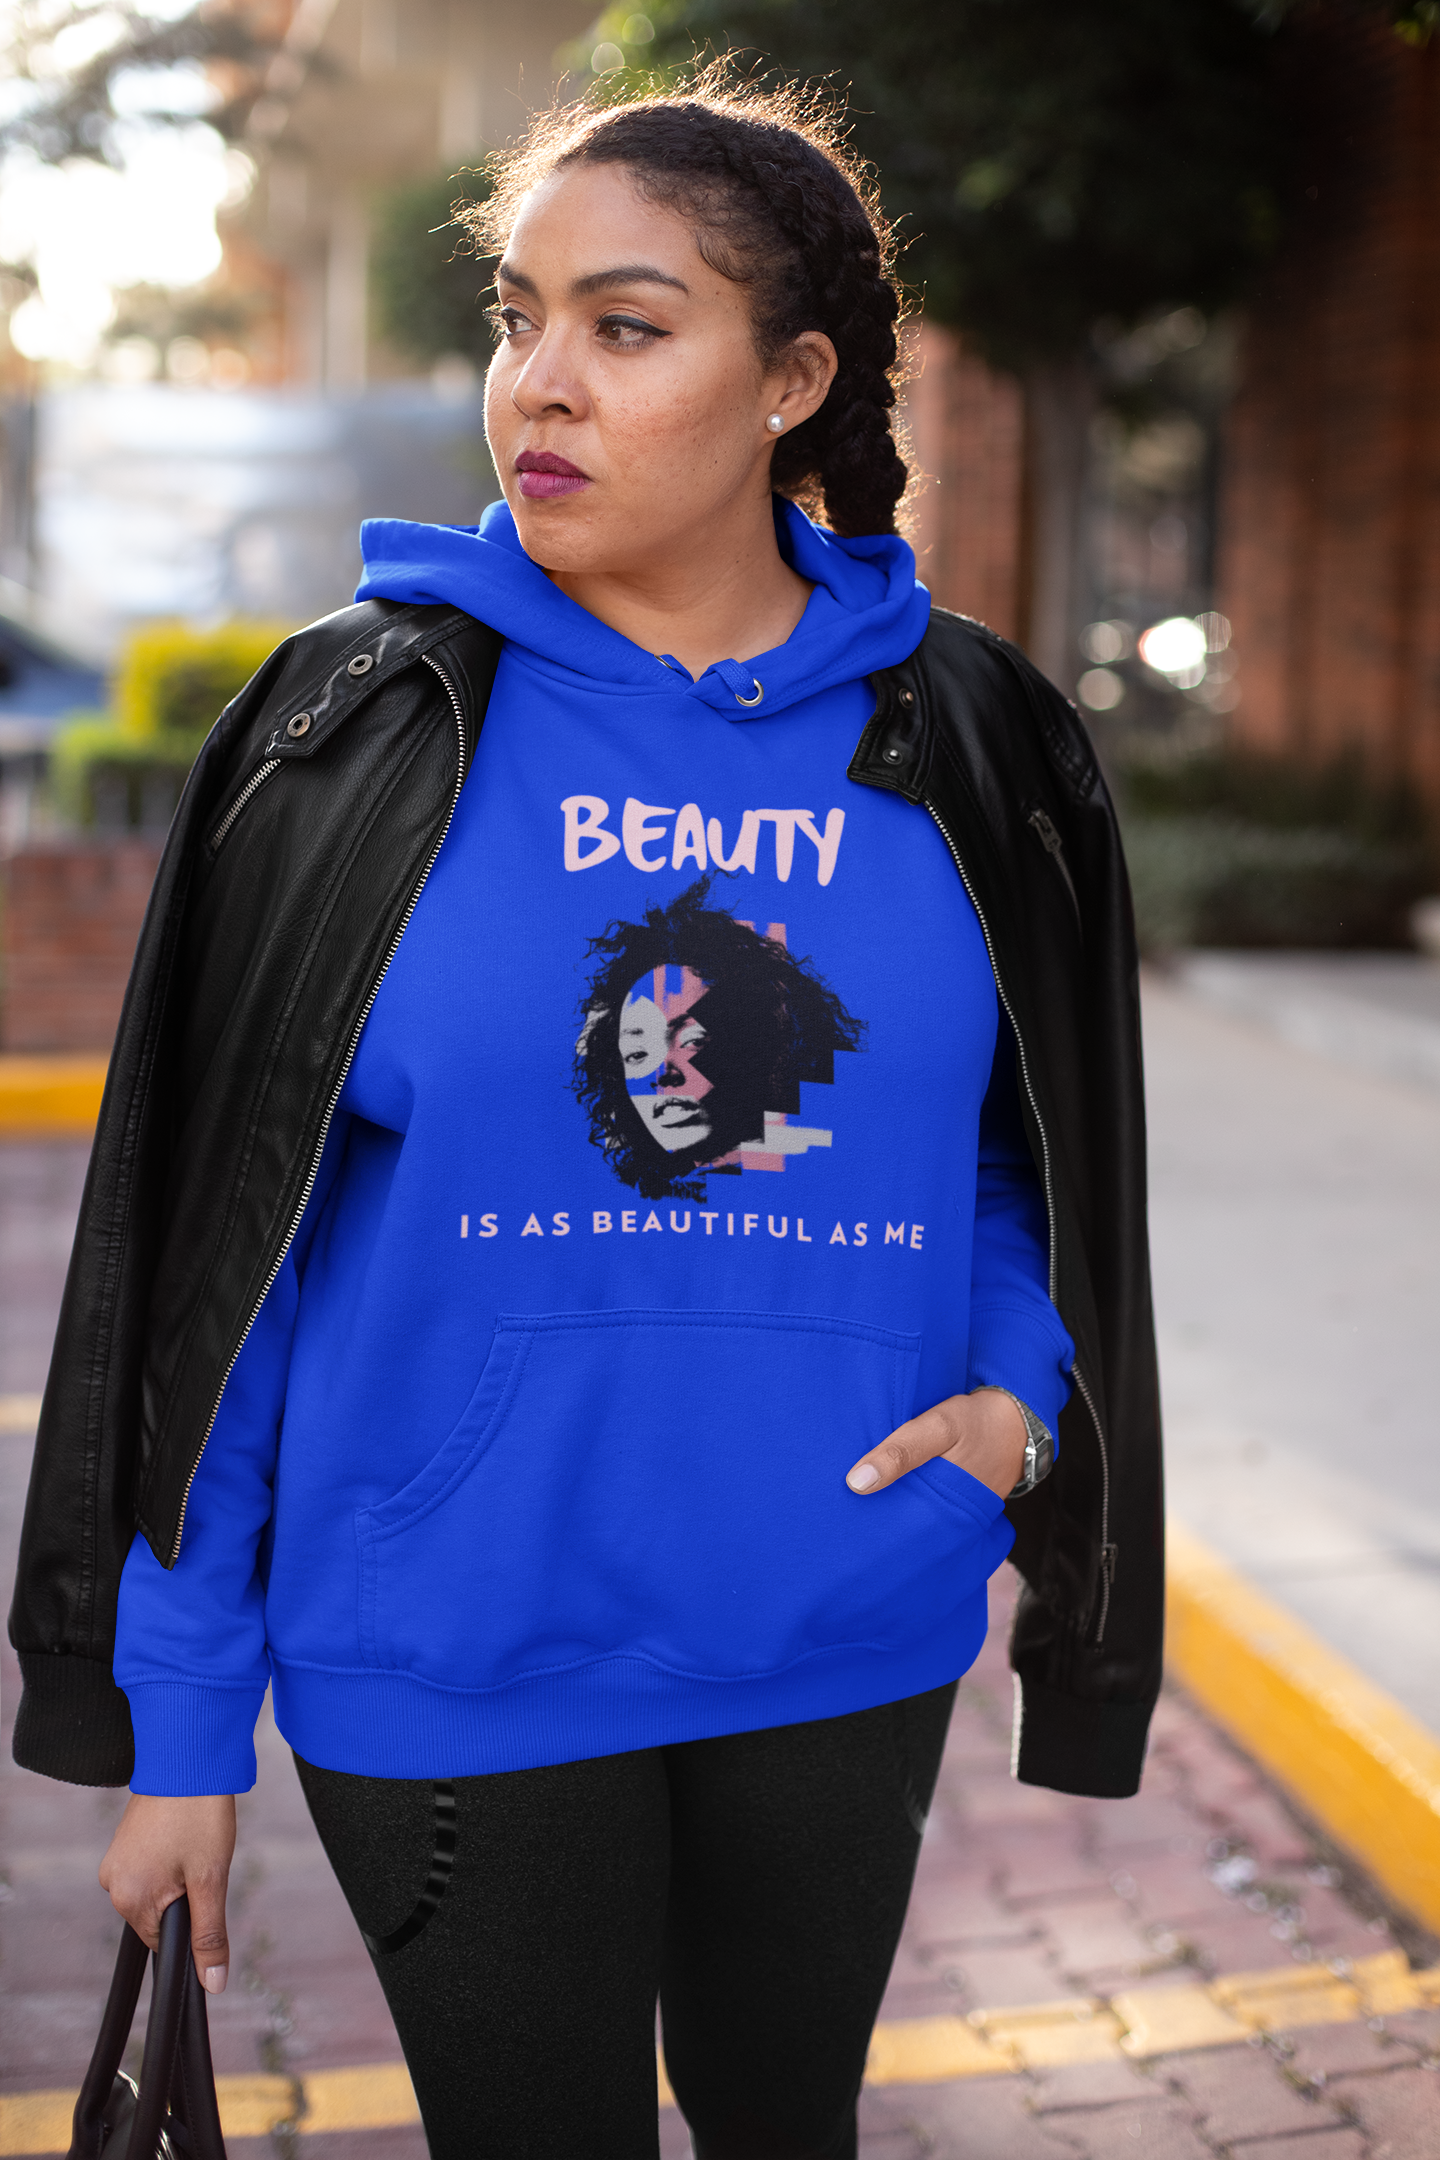 BEAUTY Pullover Hoodie - 8 oz. Cotton/Polyester Fleece, Retail Fit, Unisex Sizing, Ribbed Cuffs/Waistband, Pouch Pocket, Side Seams - Shop Blue Orchid Boutique